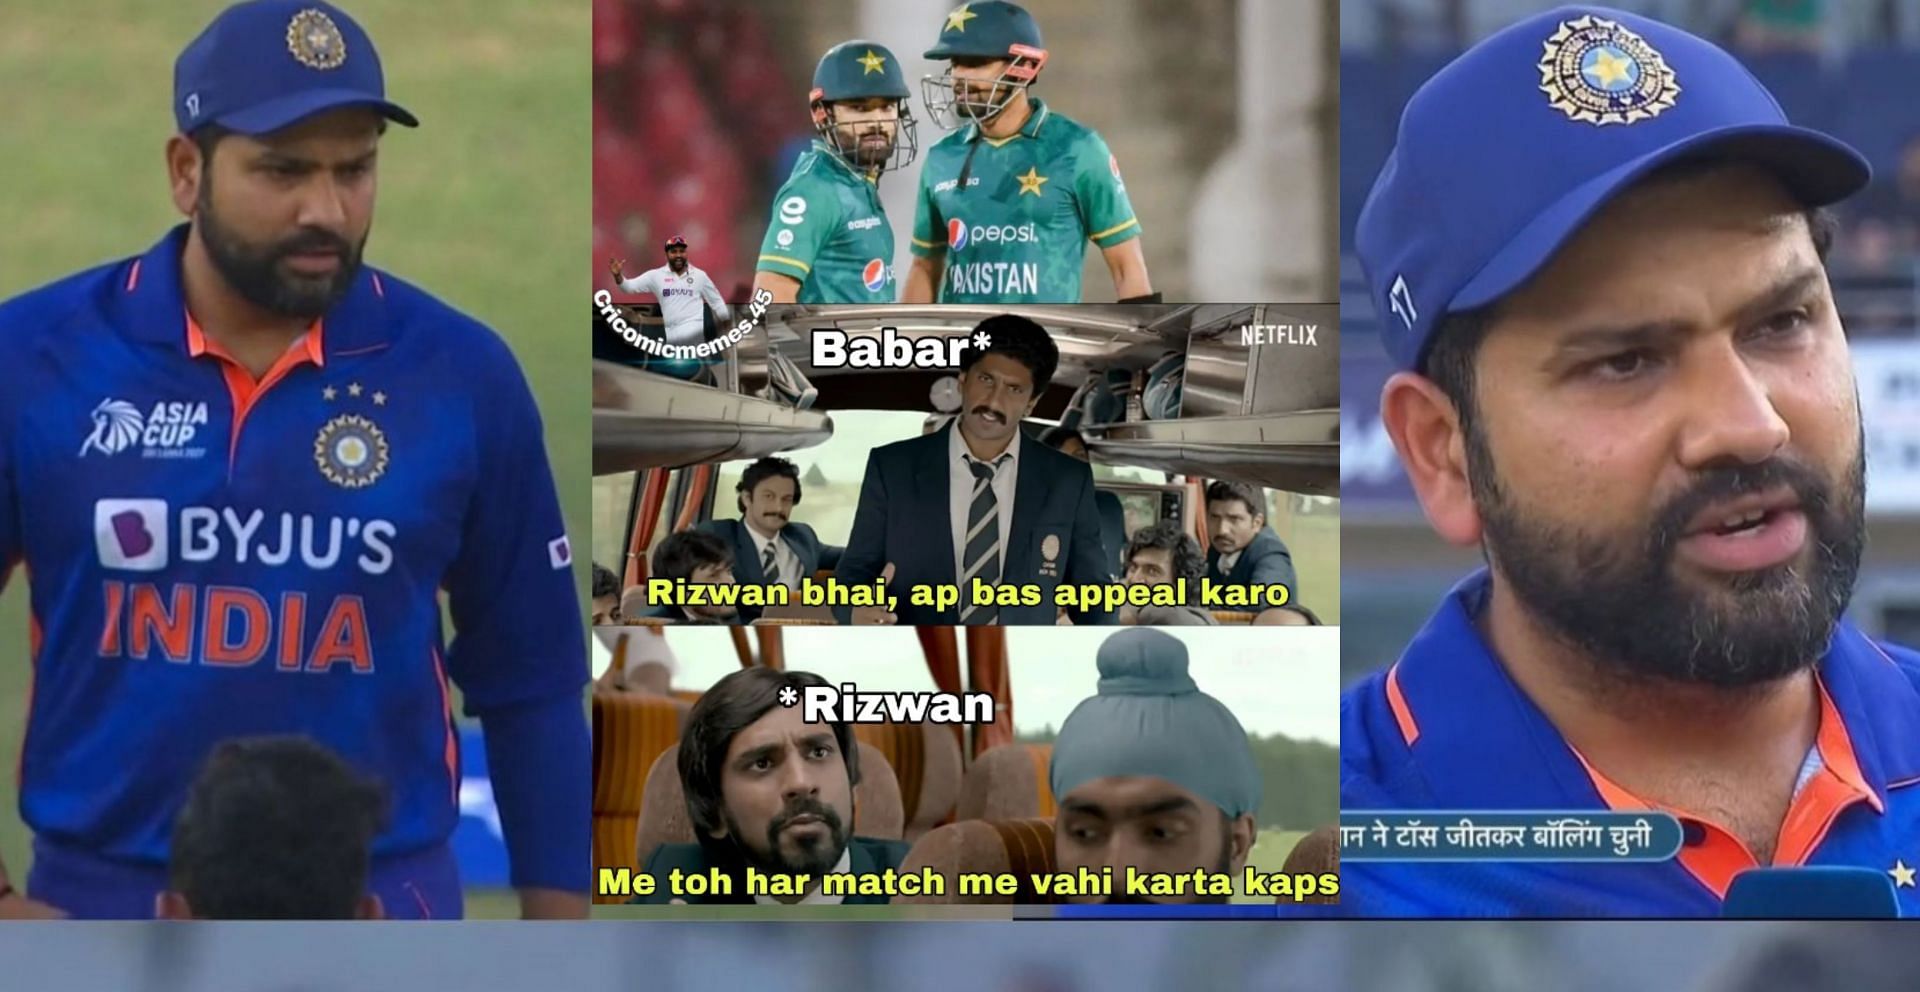 IND vs PAK 2022: Top 10 funny memes after toss as Team India make 3 changes